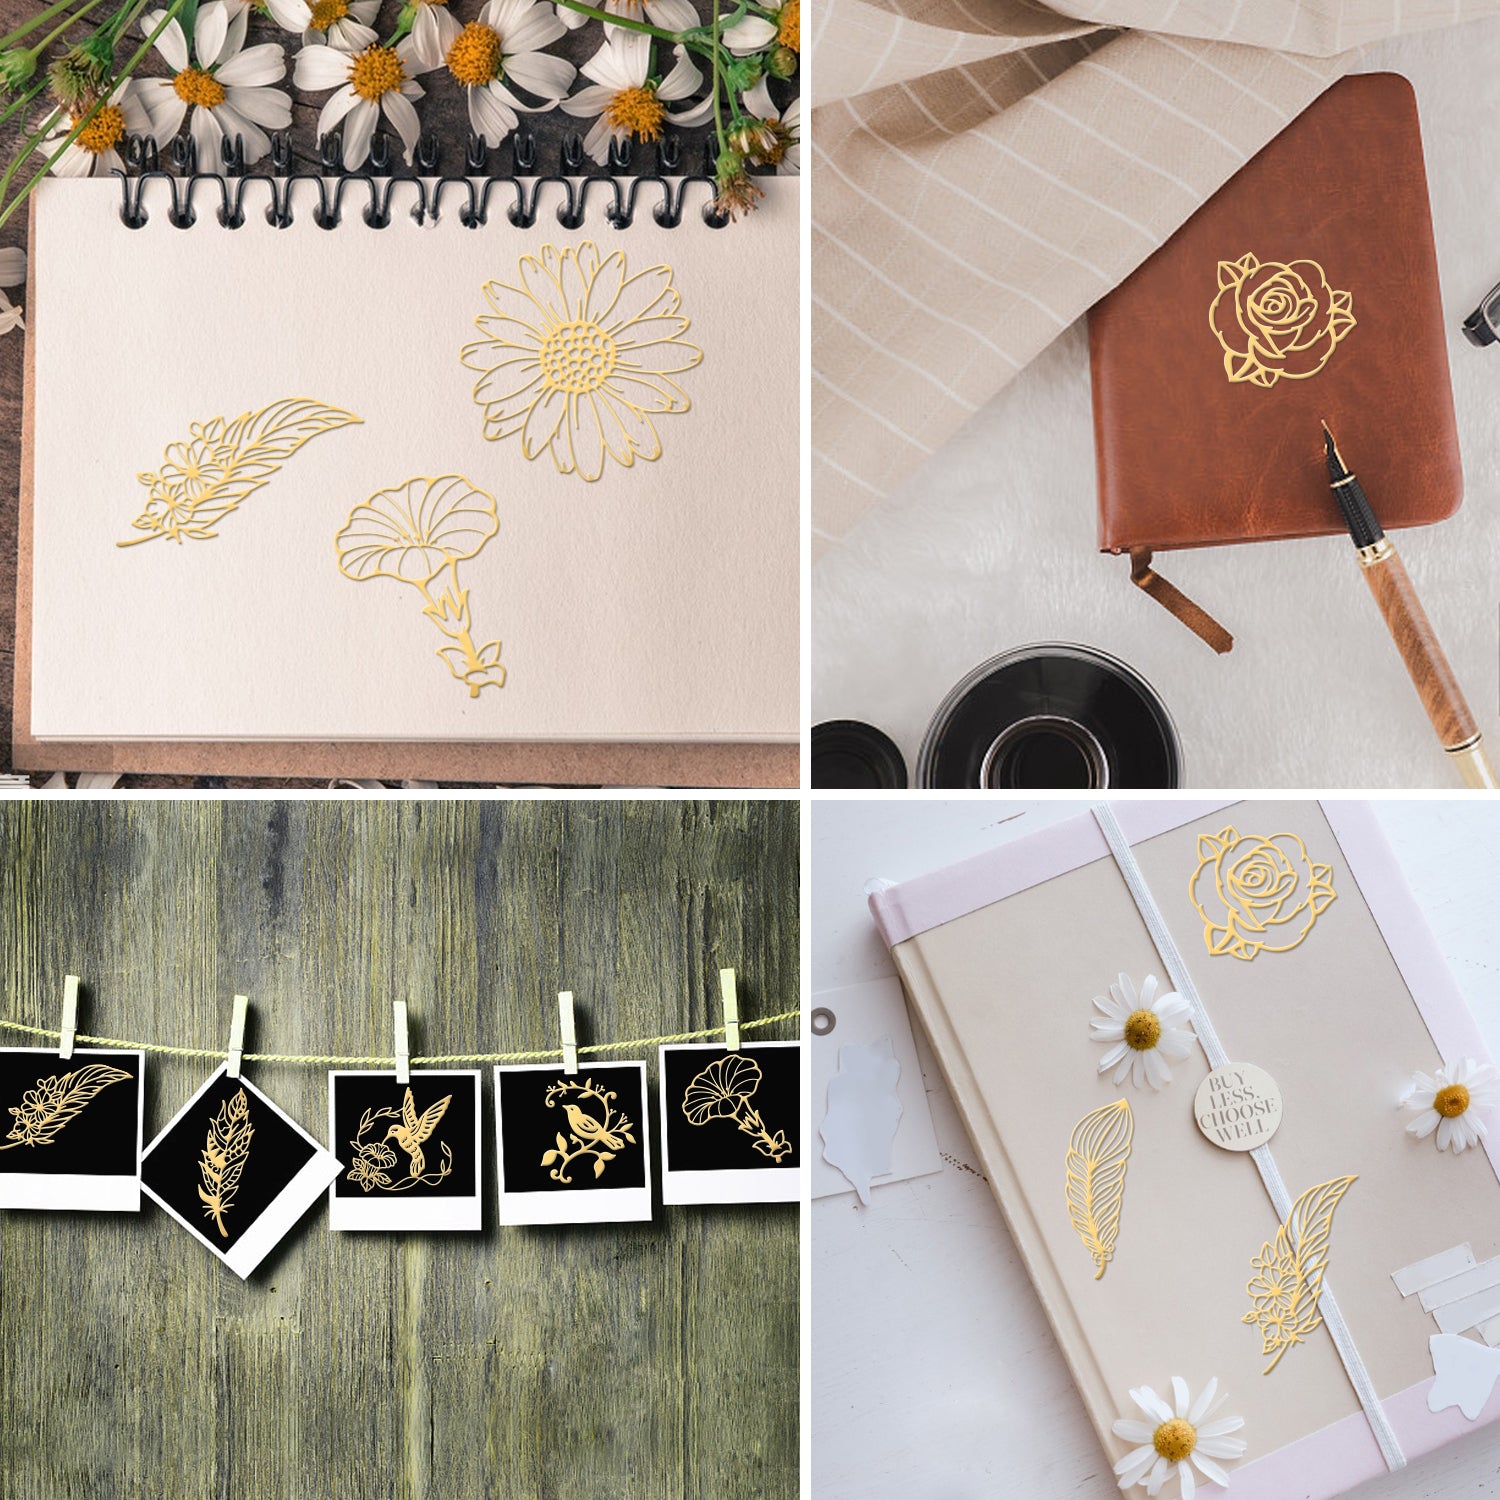 9Pcs 9 Styles Custom Carbon Steel Self-adhesive Picture Stickers, Golden, Flower & Leaf & Bird, Mixed Patterns